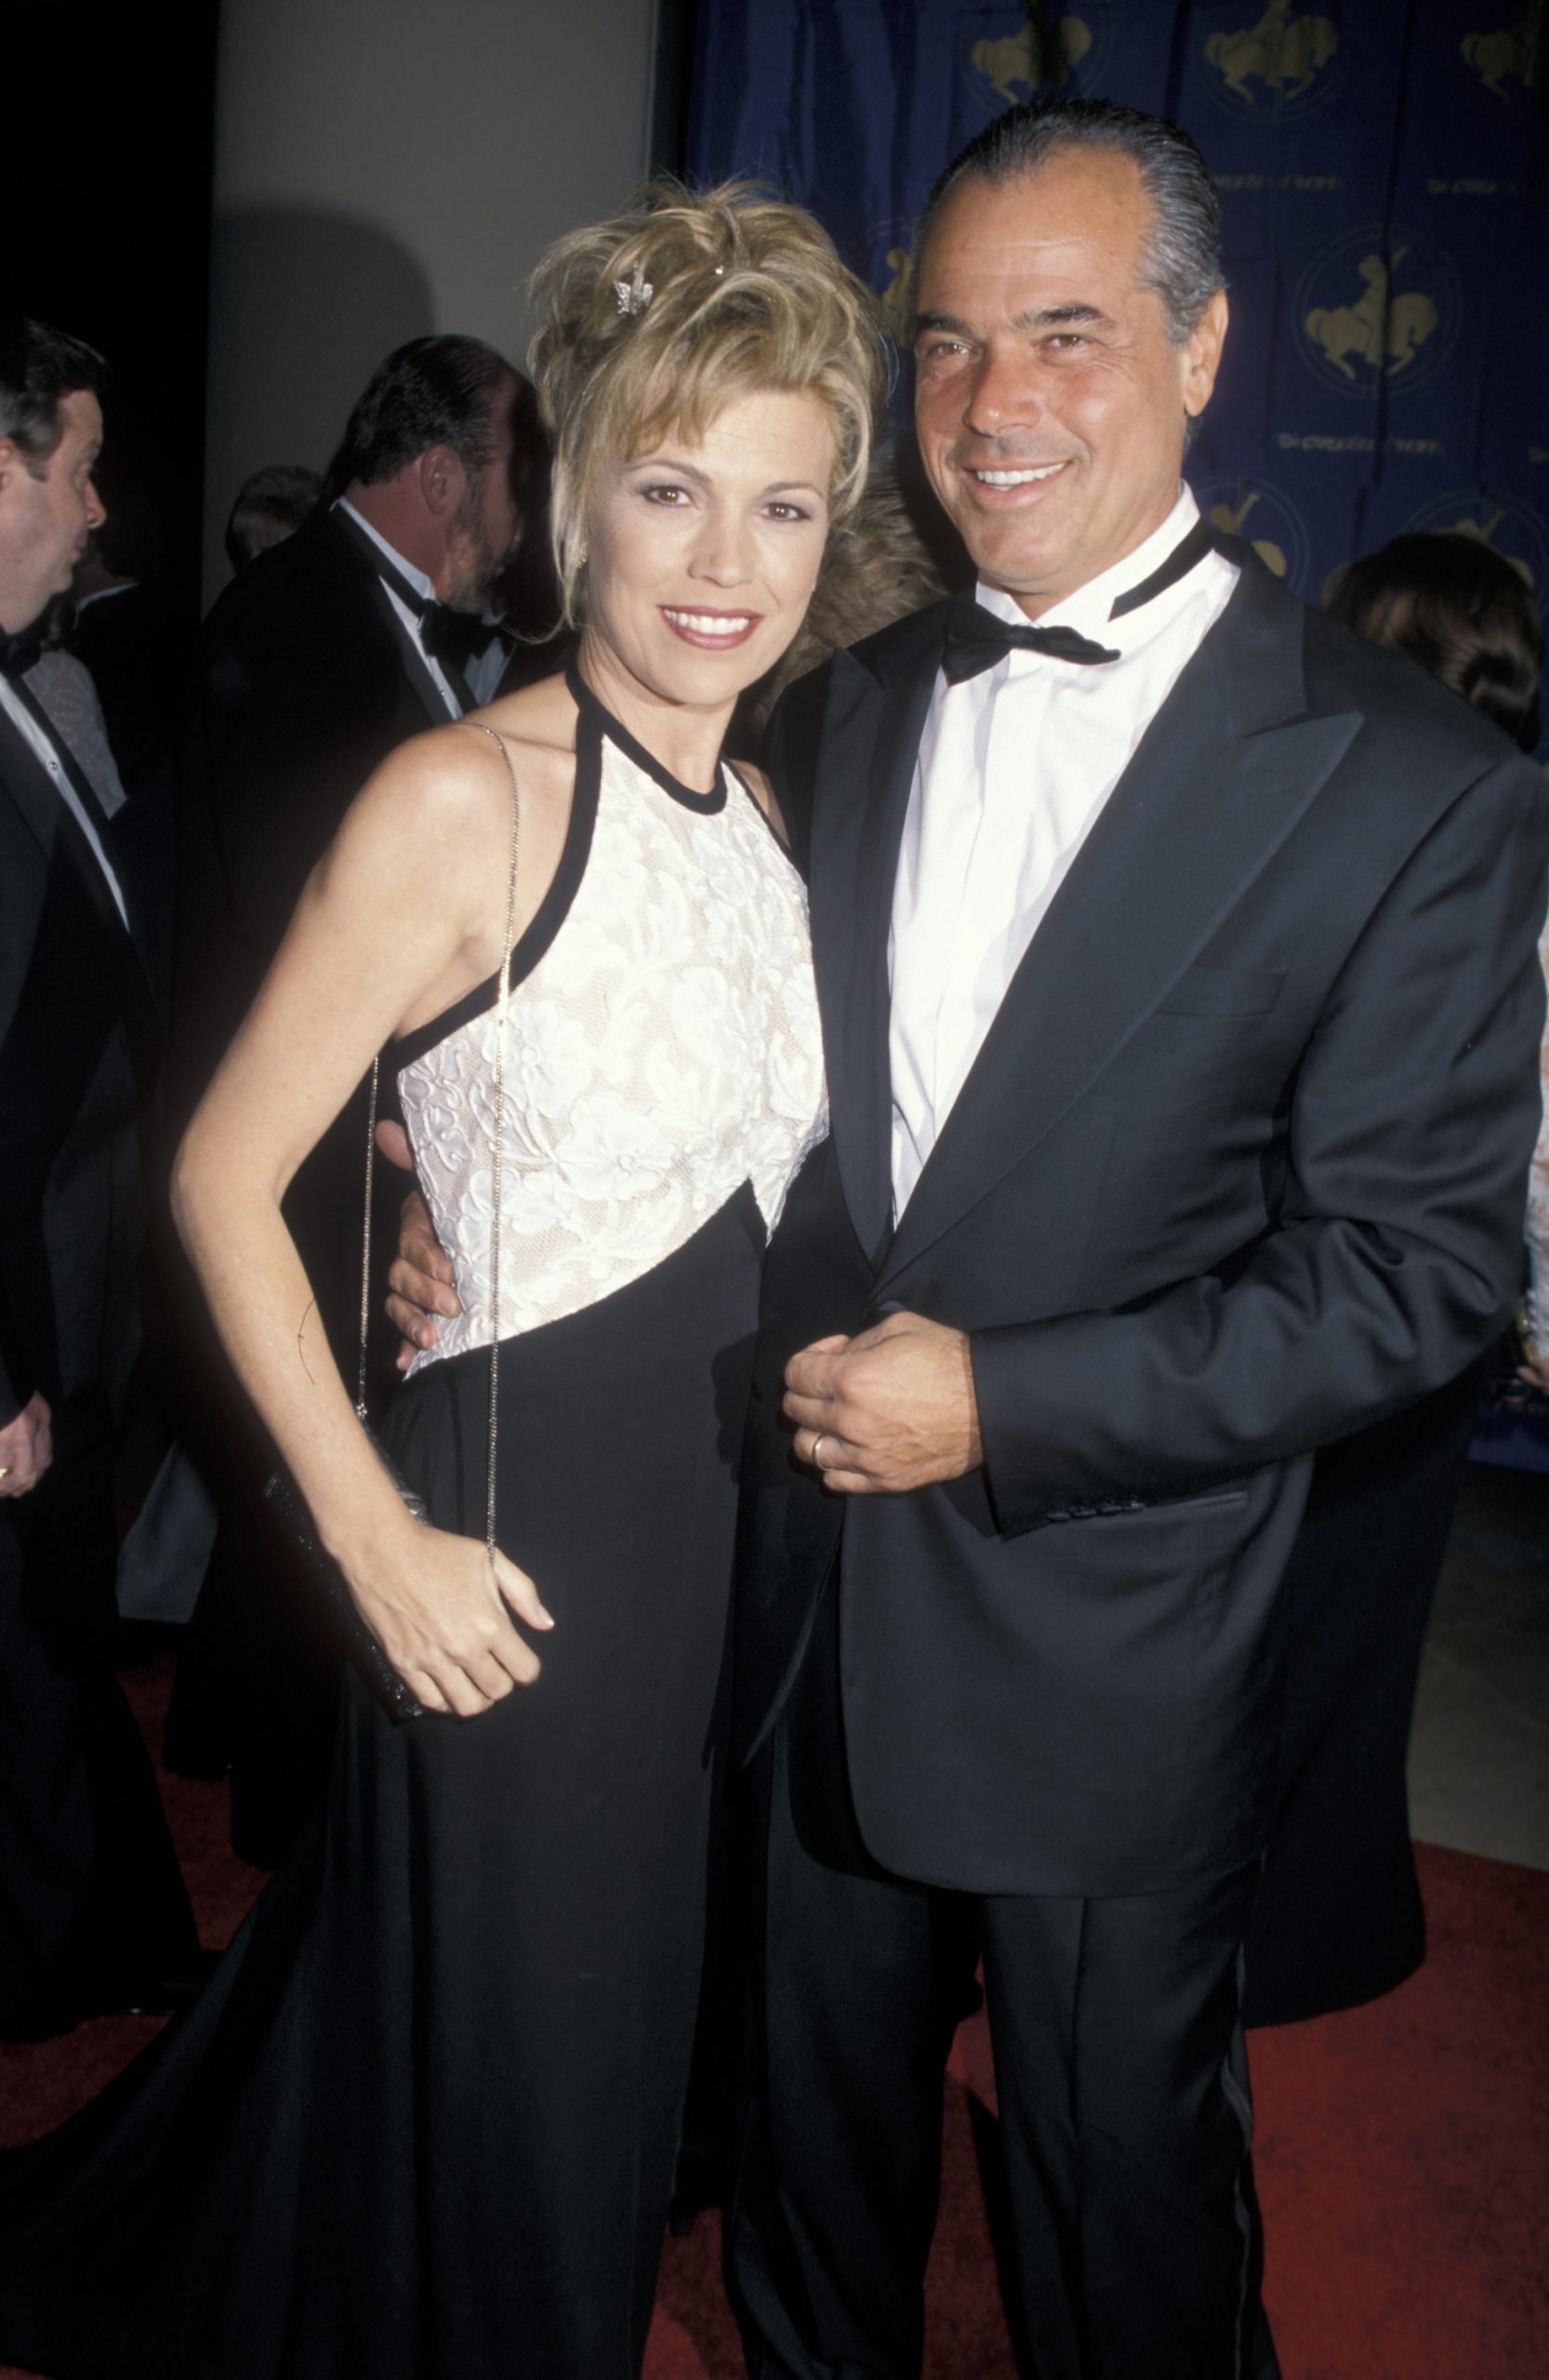 Vanna White And Then Husband George Santopietro Smiling At Benefit Together Scaled 